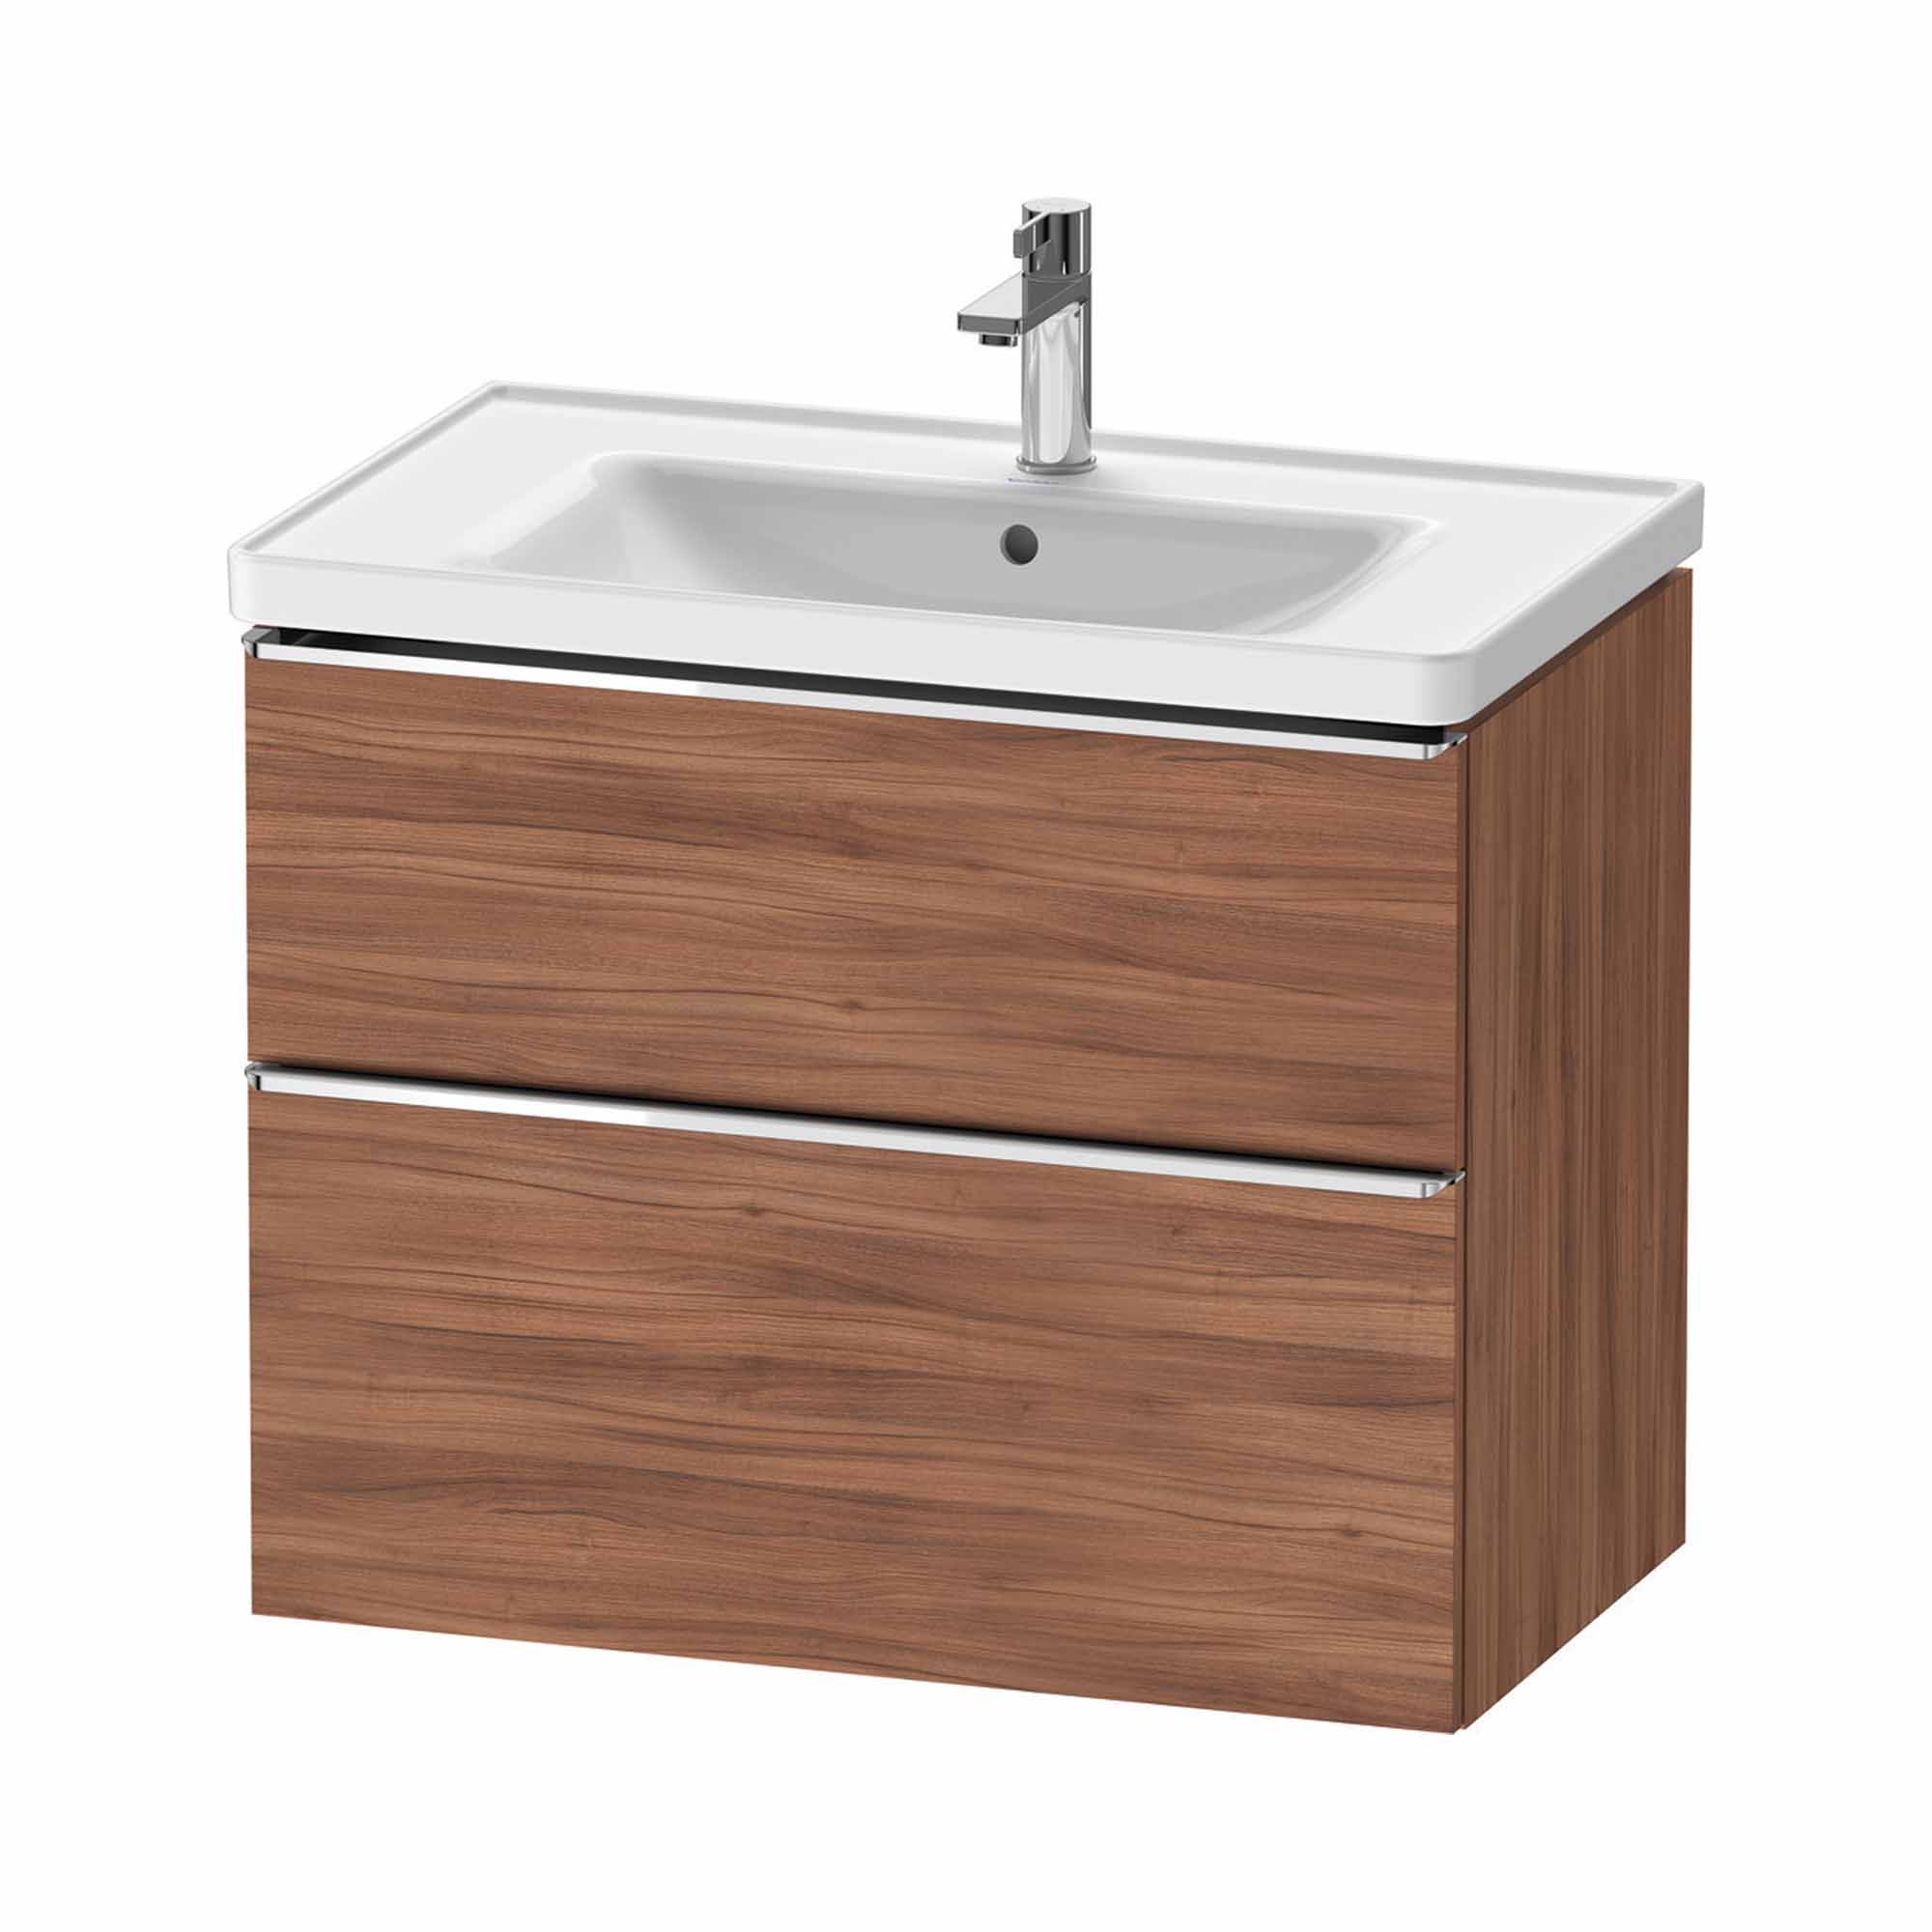 duravit d-neo 800mm wall mounted vanity unit with d-neo basin walnut chrome handles